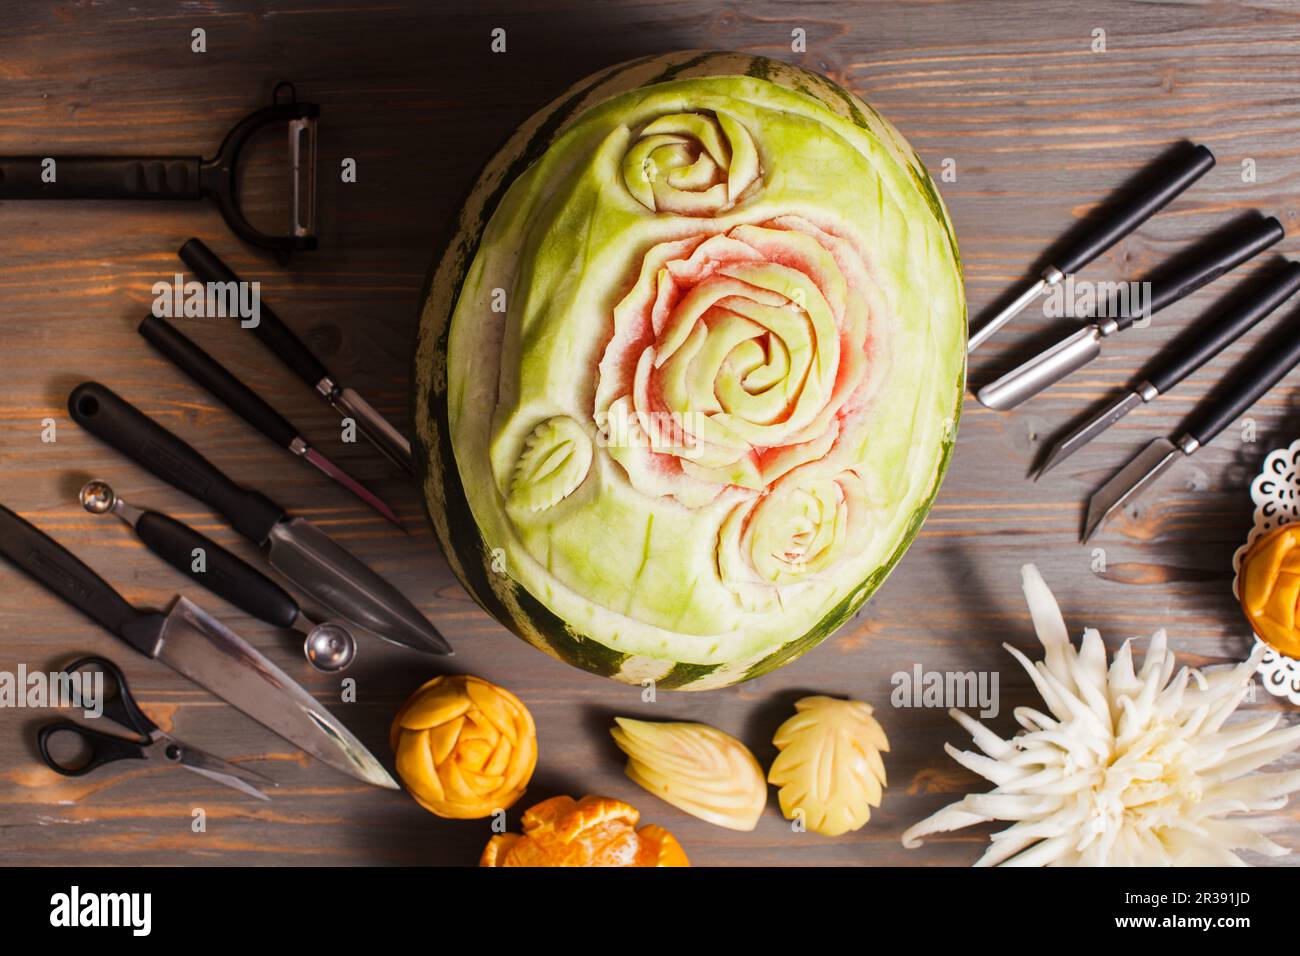 Carved watermelon fruit prepared for the carving Stock Photo